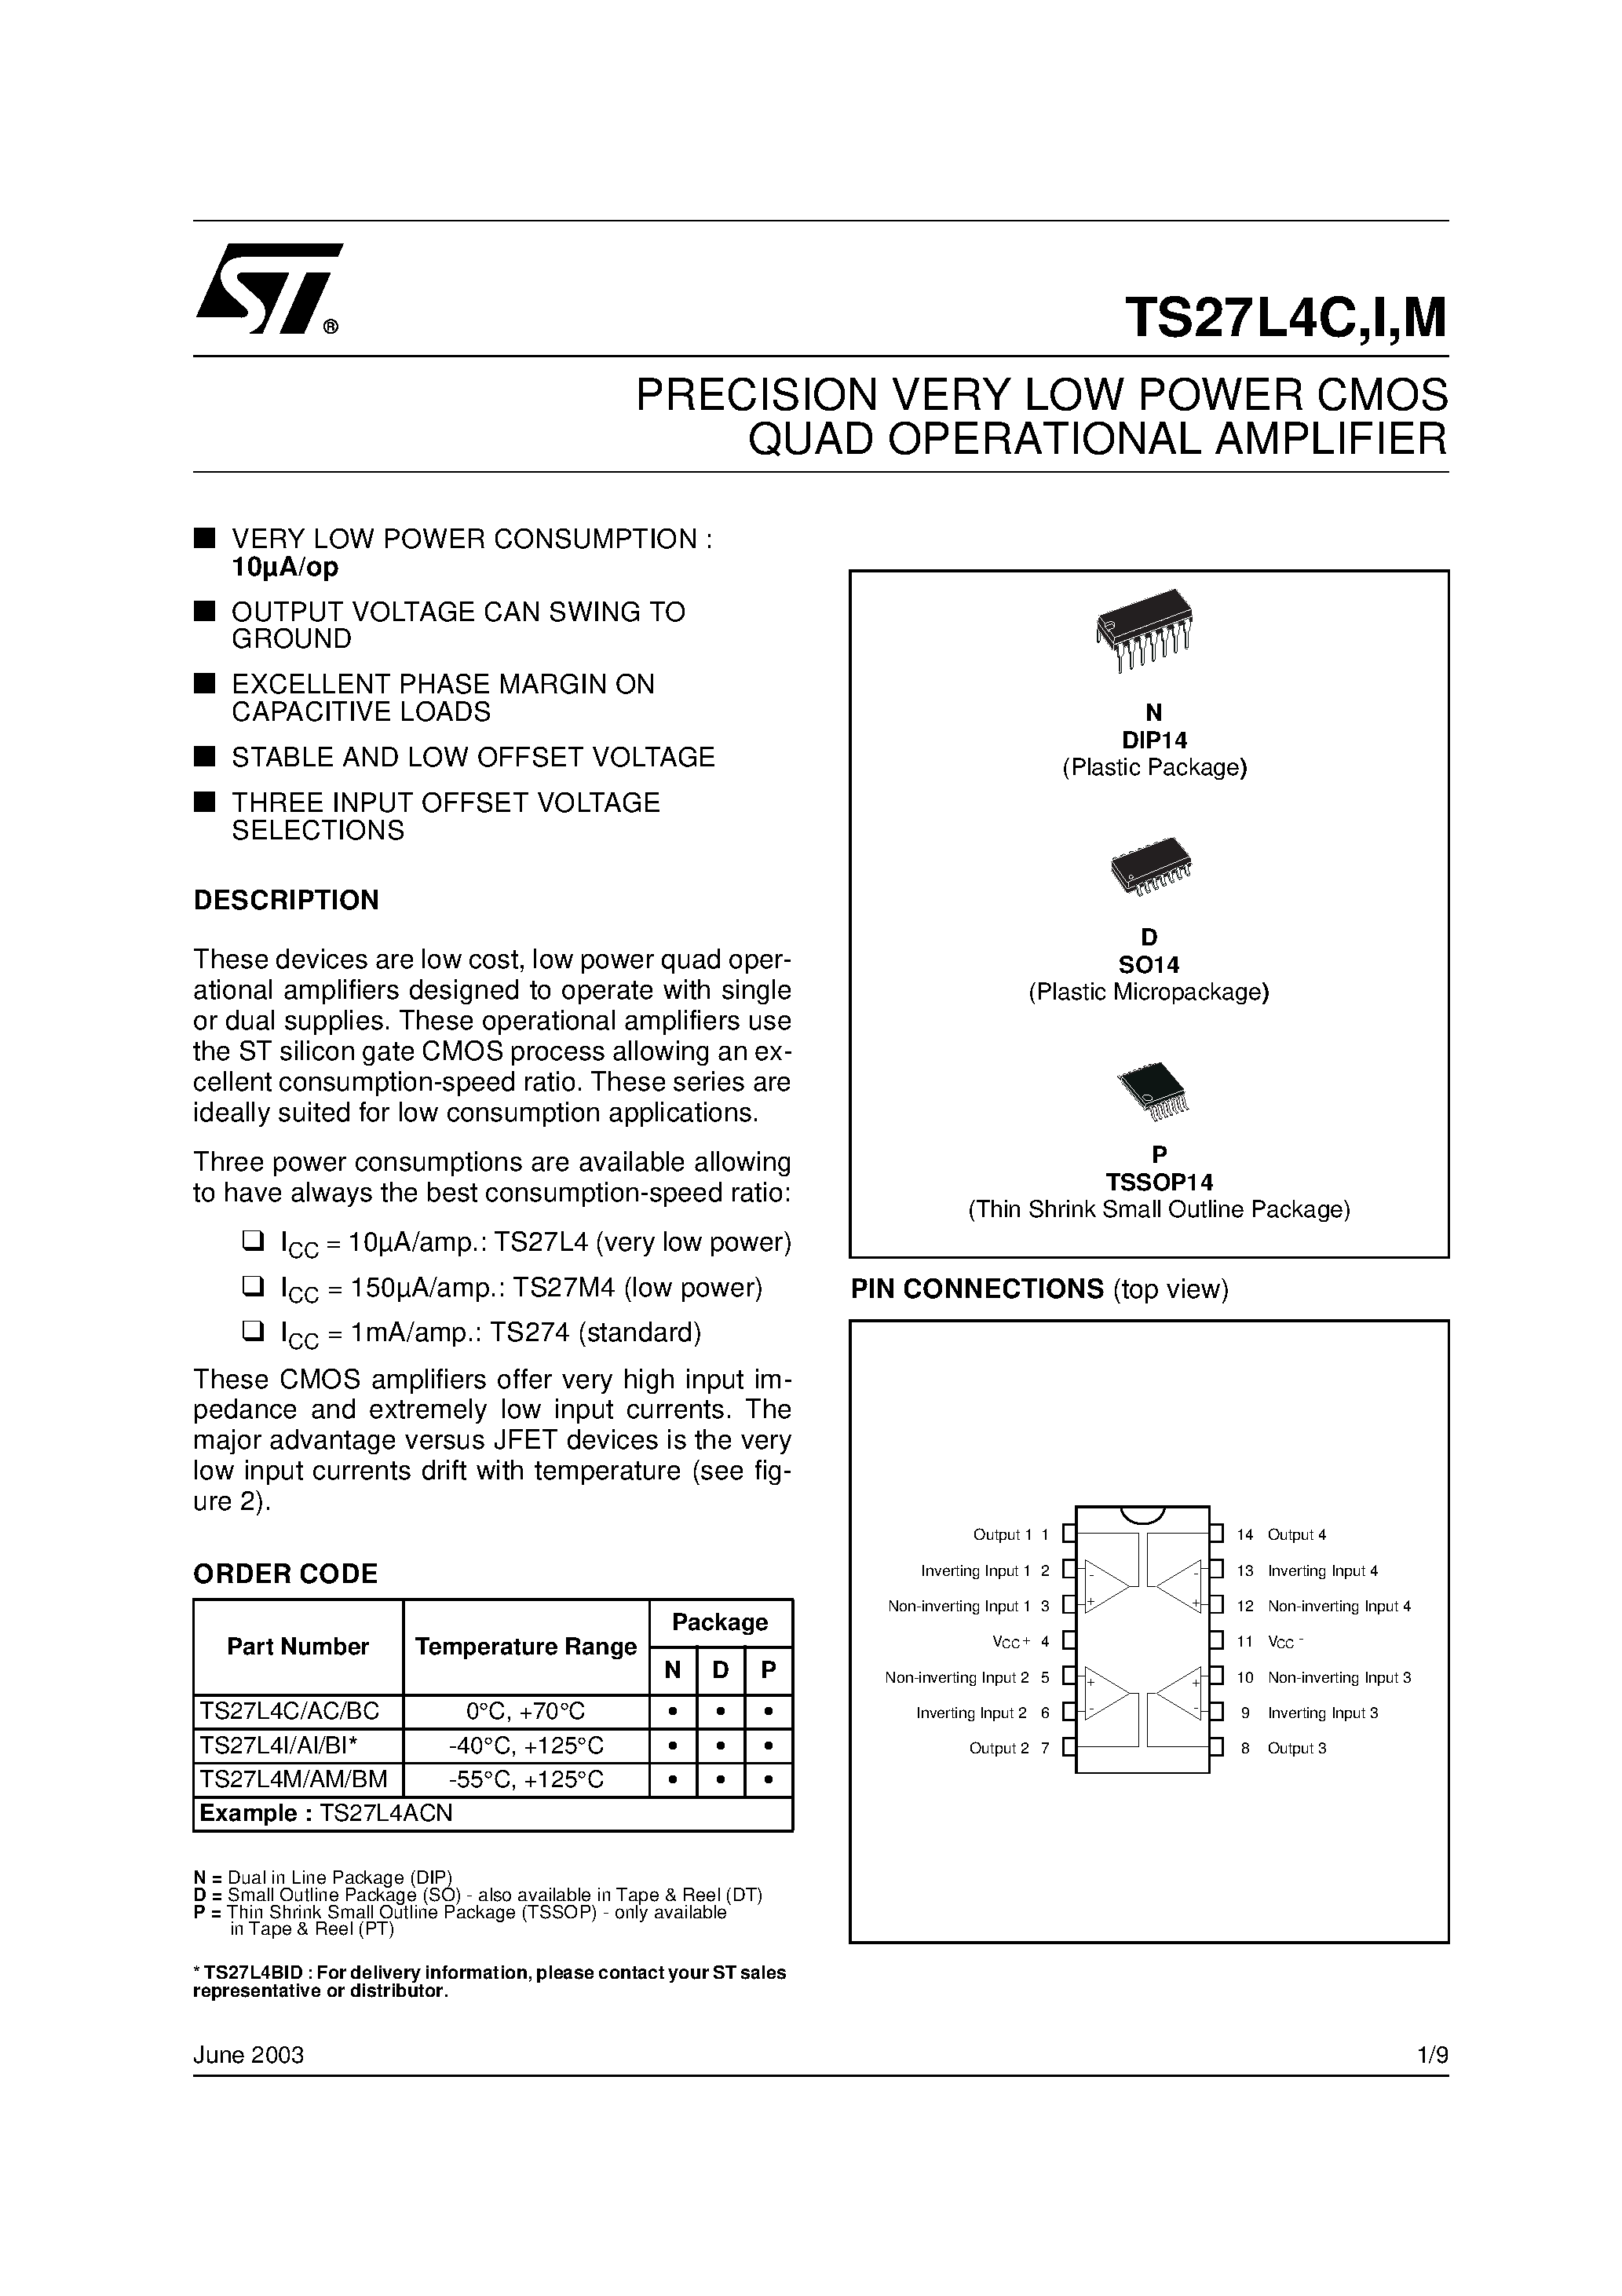 Datasheet TS27L4M - PRECISION VERY LOW POWER CMOS QUAD OPERATIONAL AMPLIFIER page 1